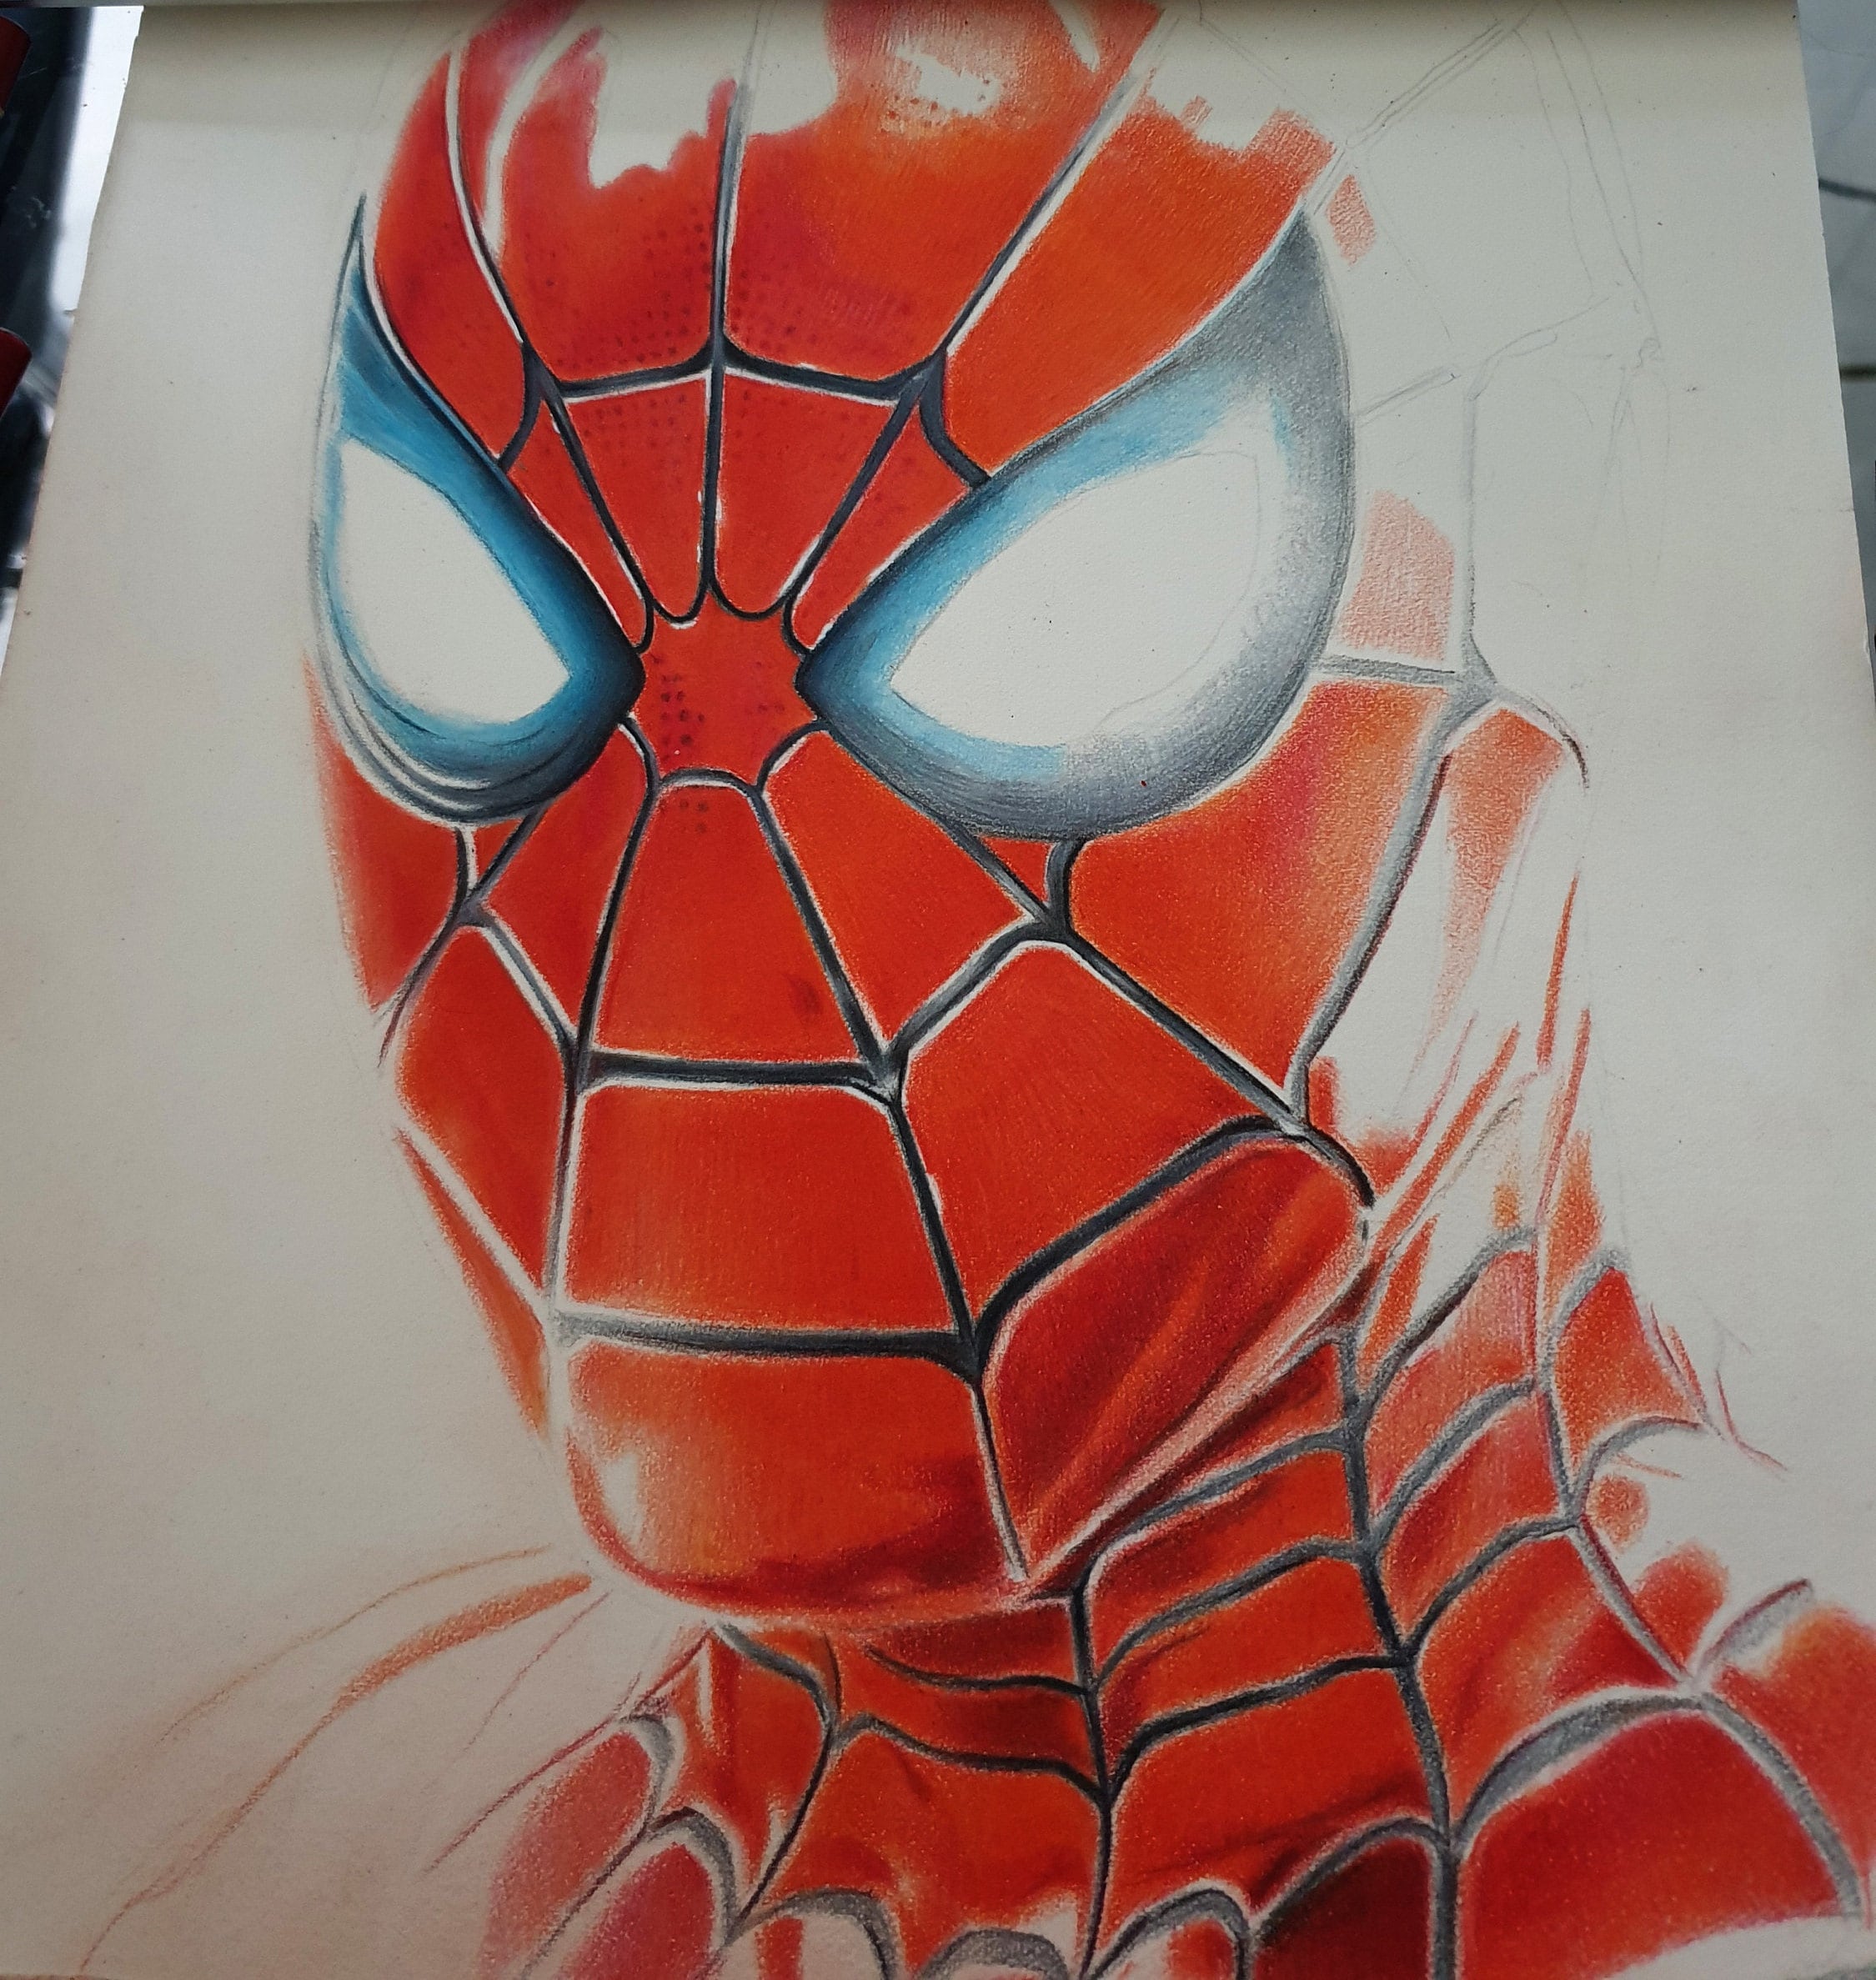 Black suit Spidey quick sketch with posca white paint pen, Pentel pocket  brush and staedtler red pen. : r/comicbookart